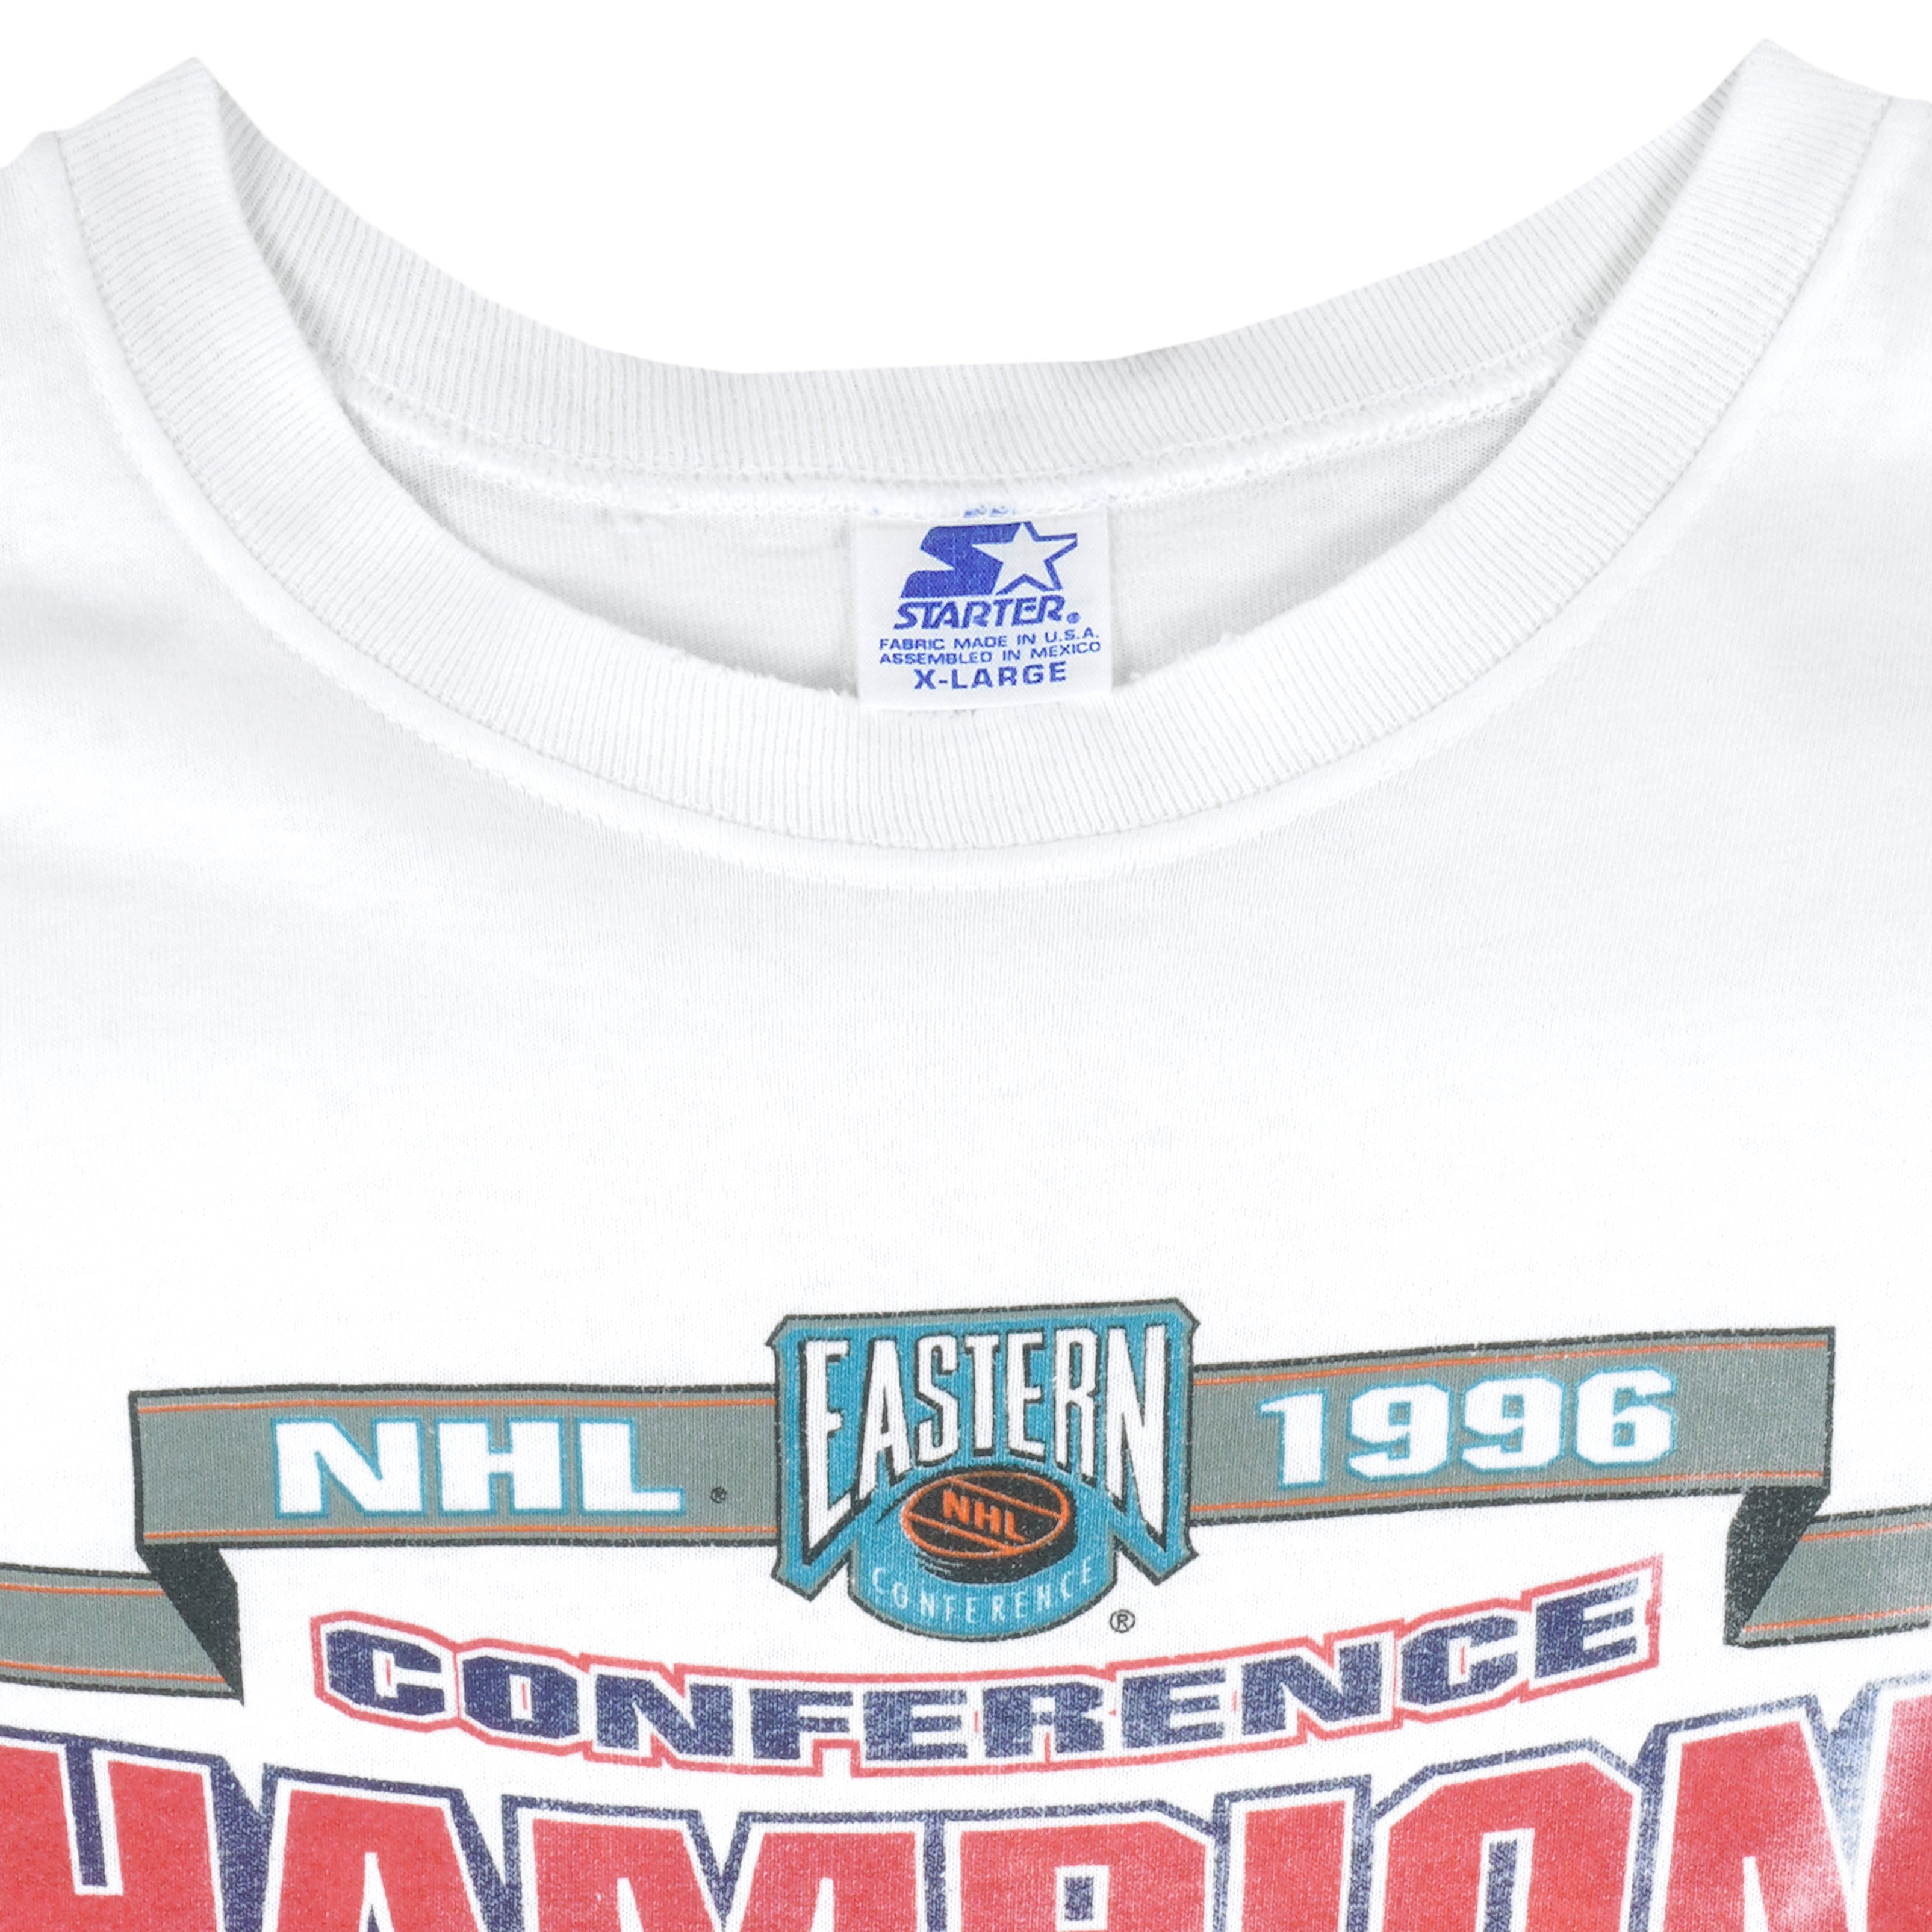 Florida Panthers Tee Vintage 90s NHL Eastern Conference